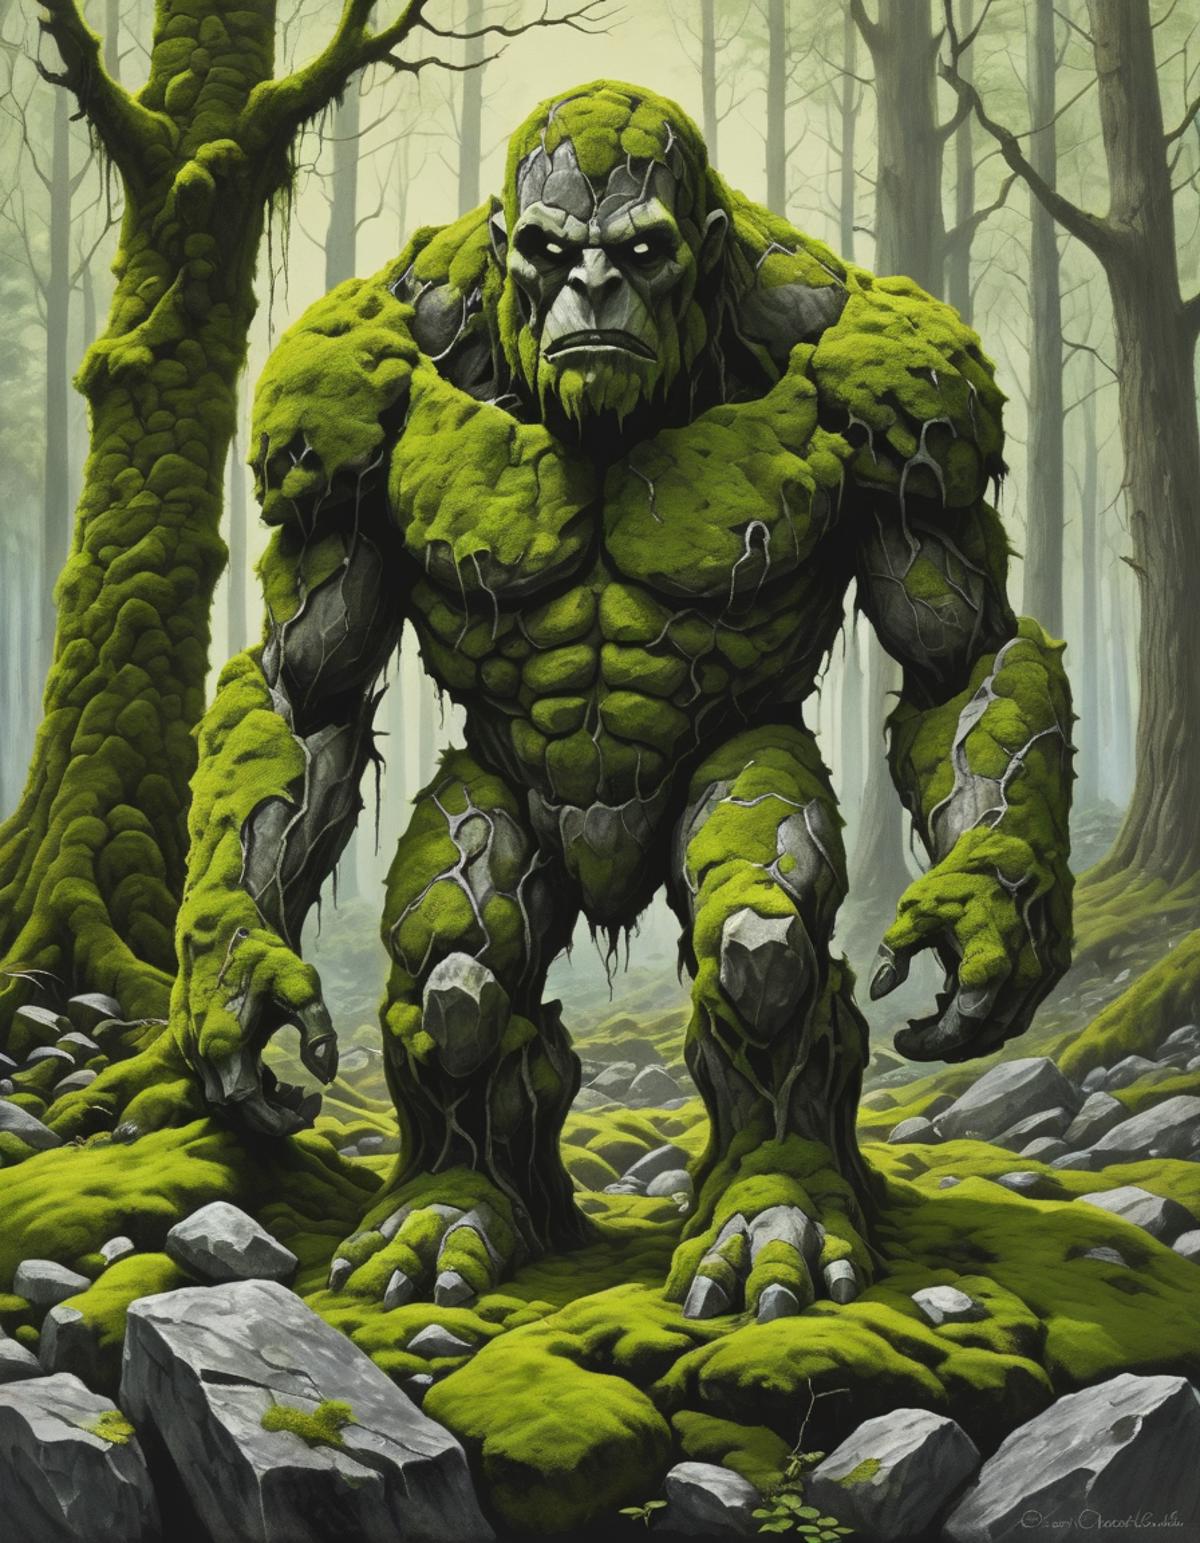 A green and rocky monster standing in a forest.